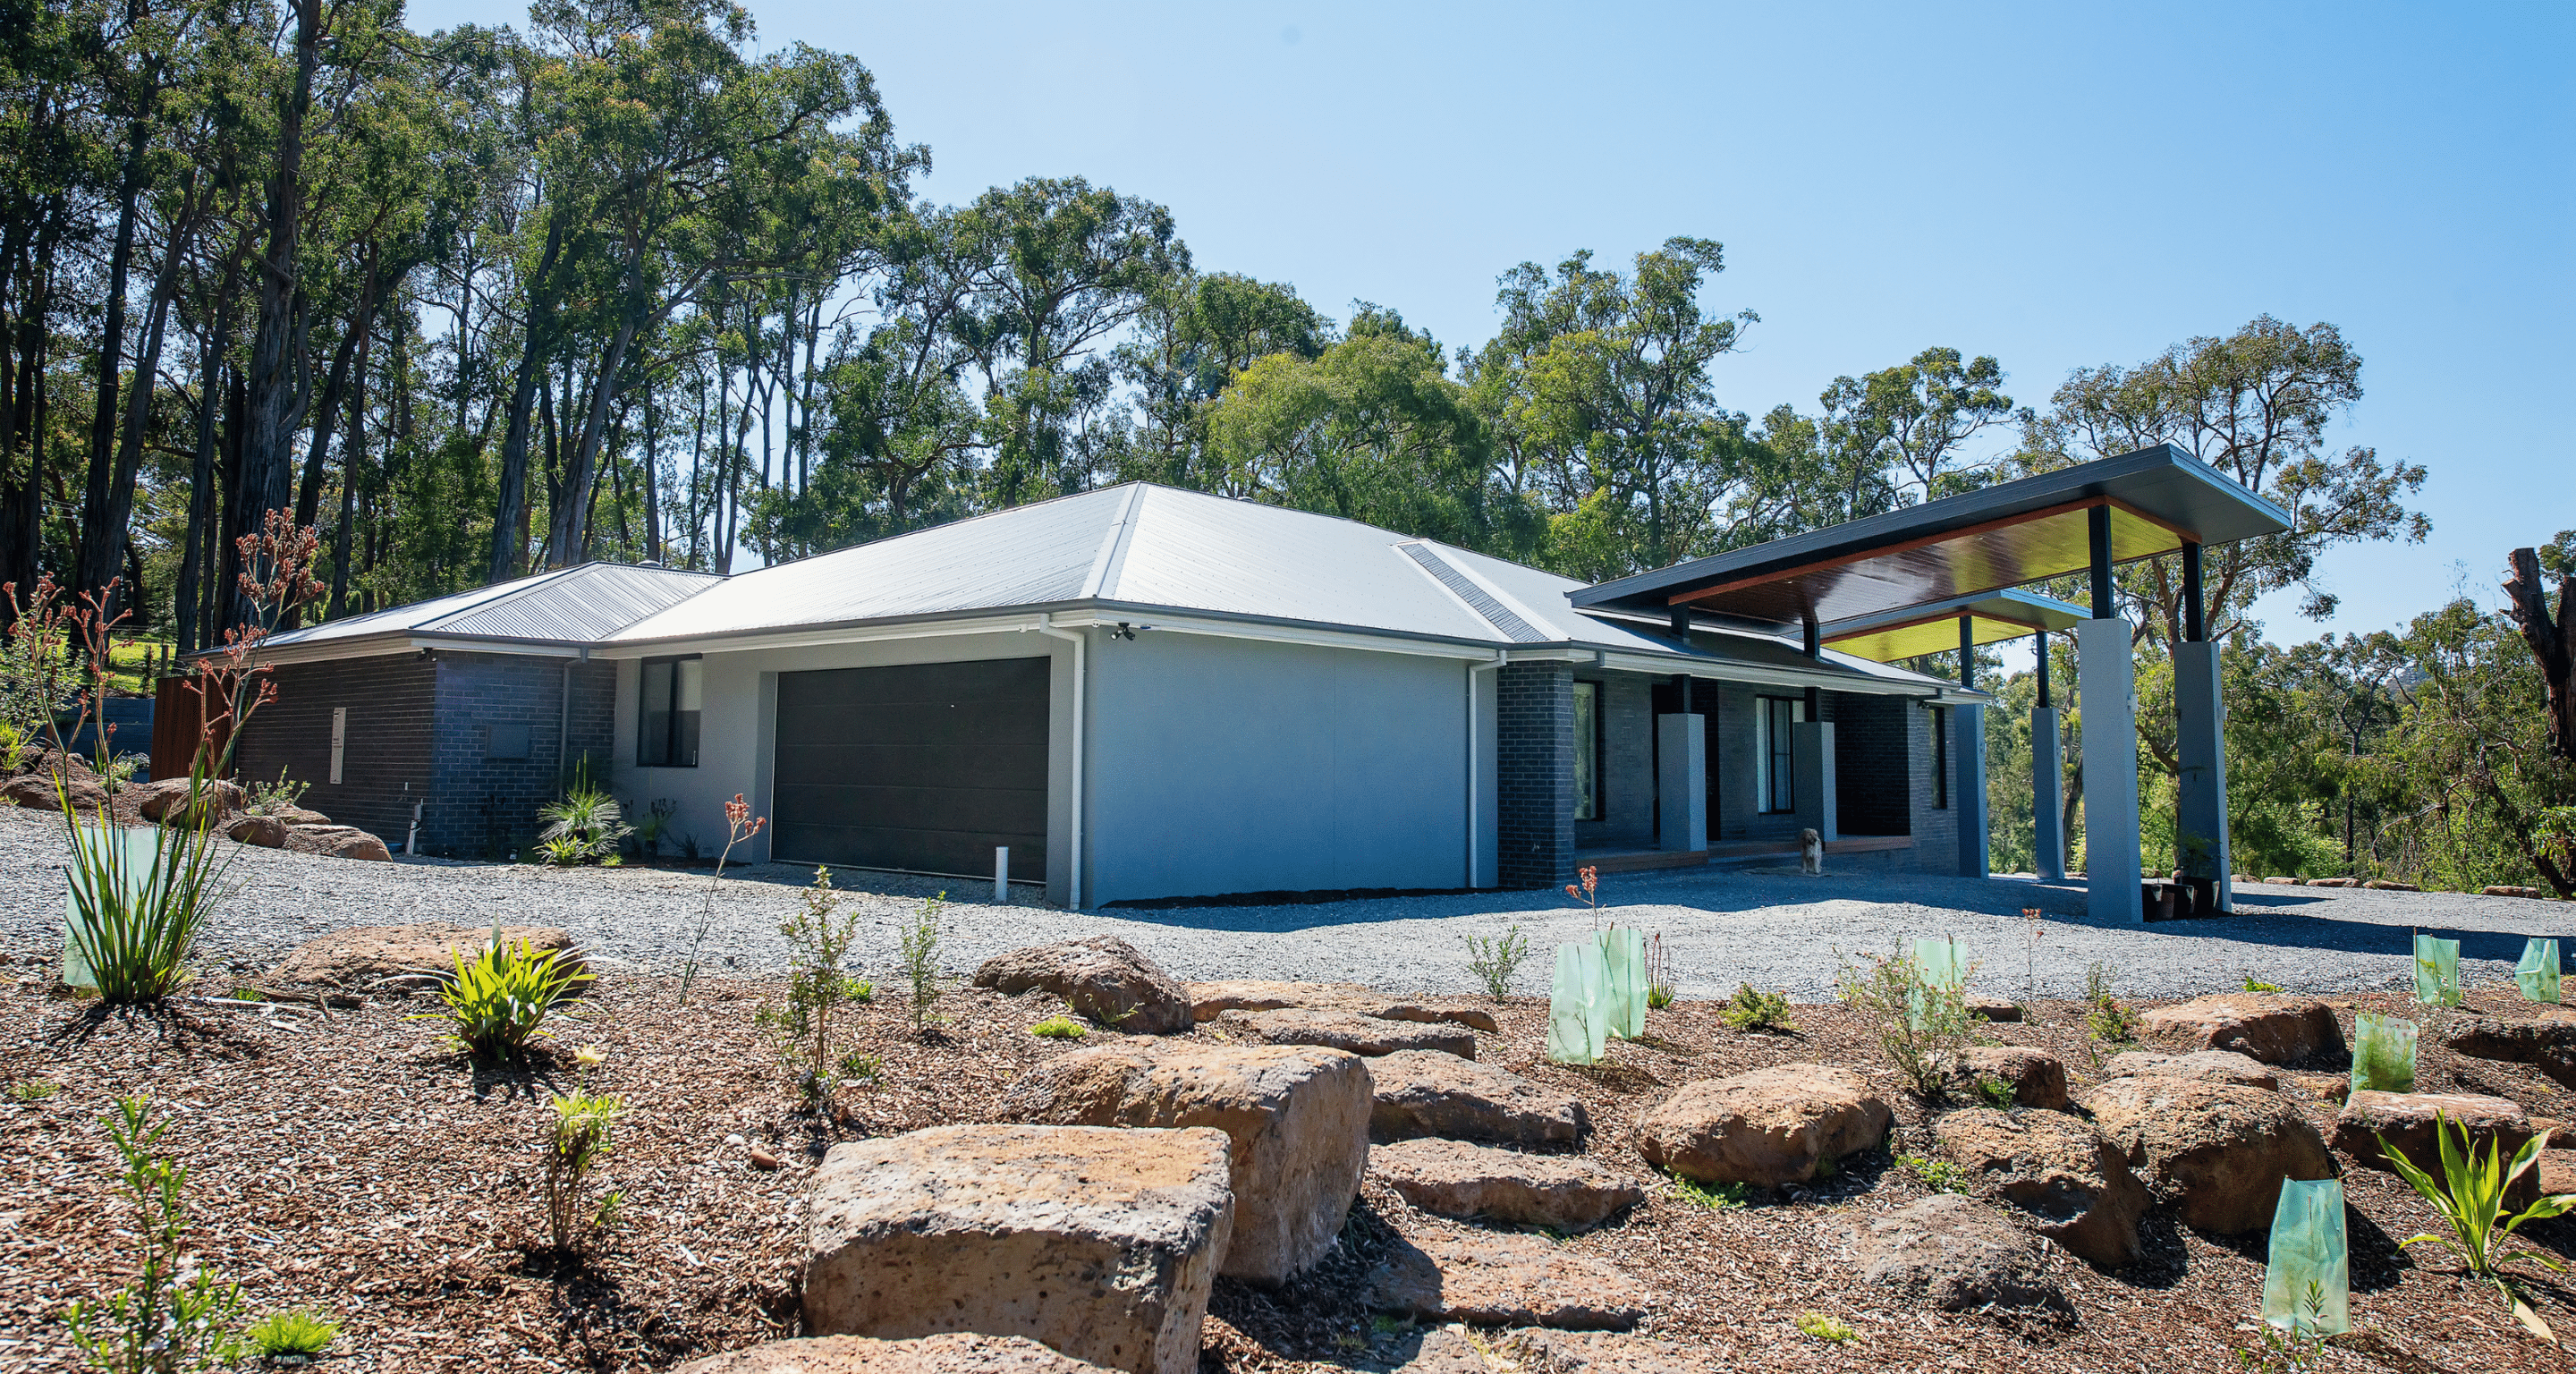 Photo of a Cobalt Constructions completed build in the Yarra Valley